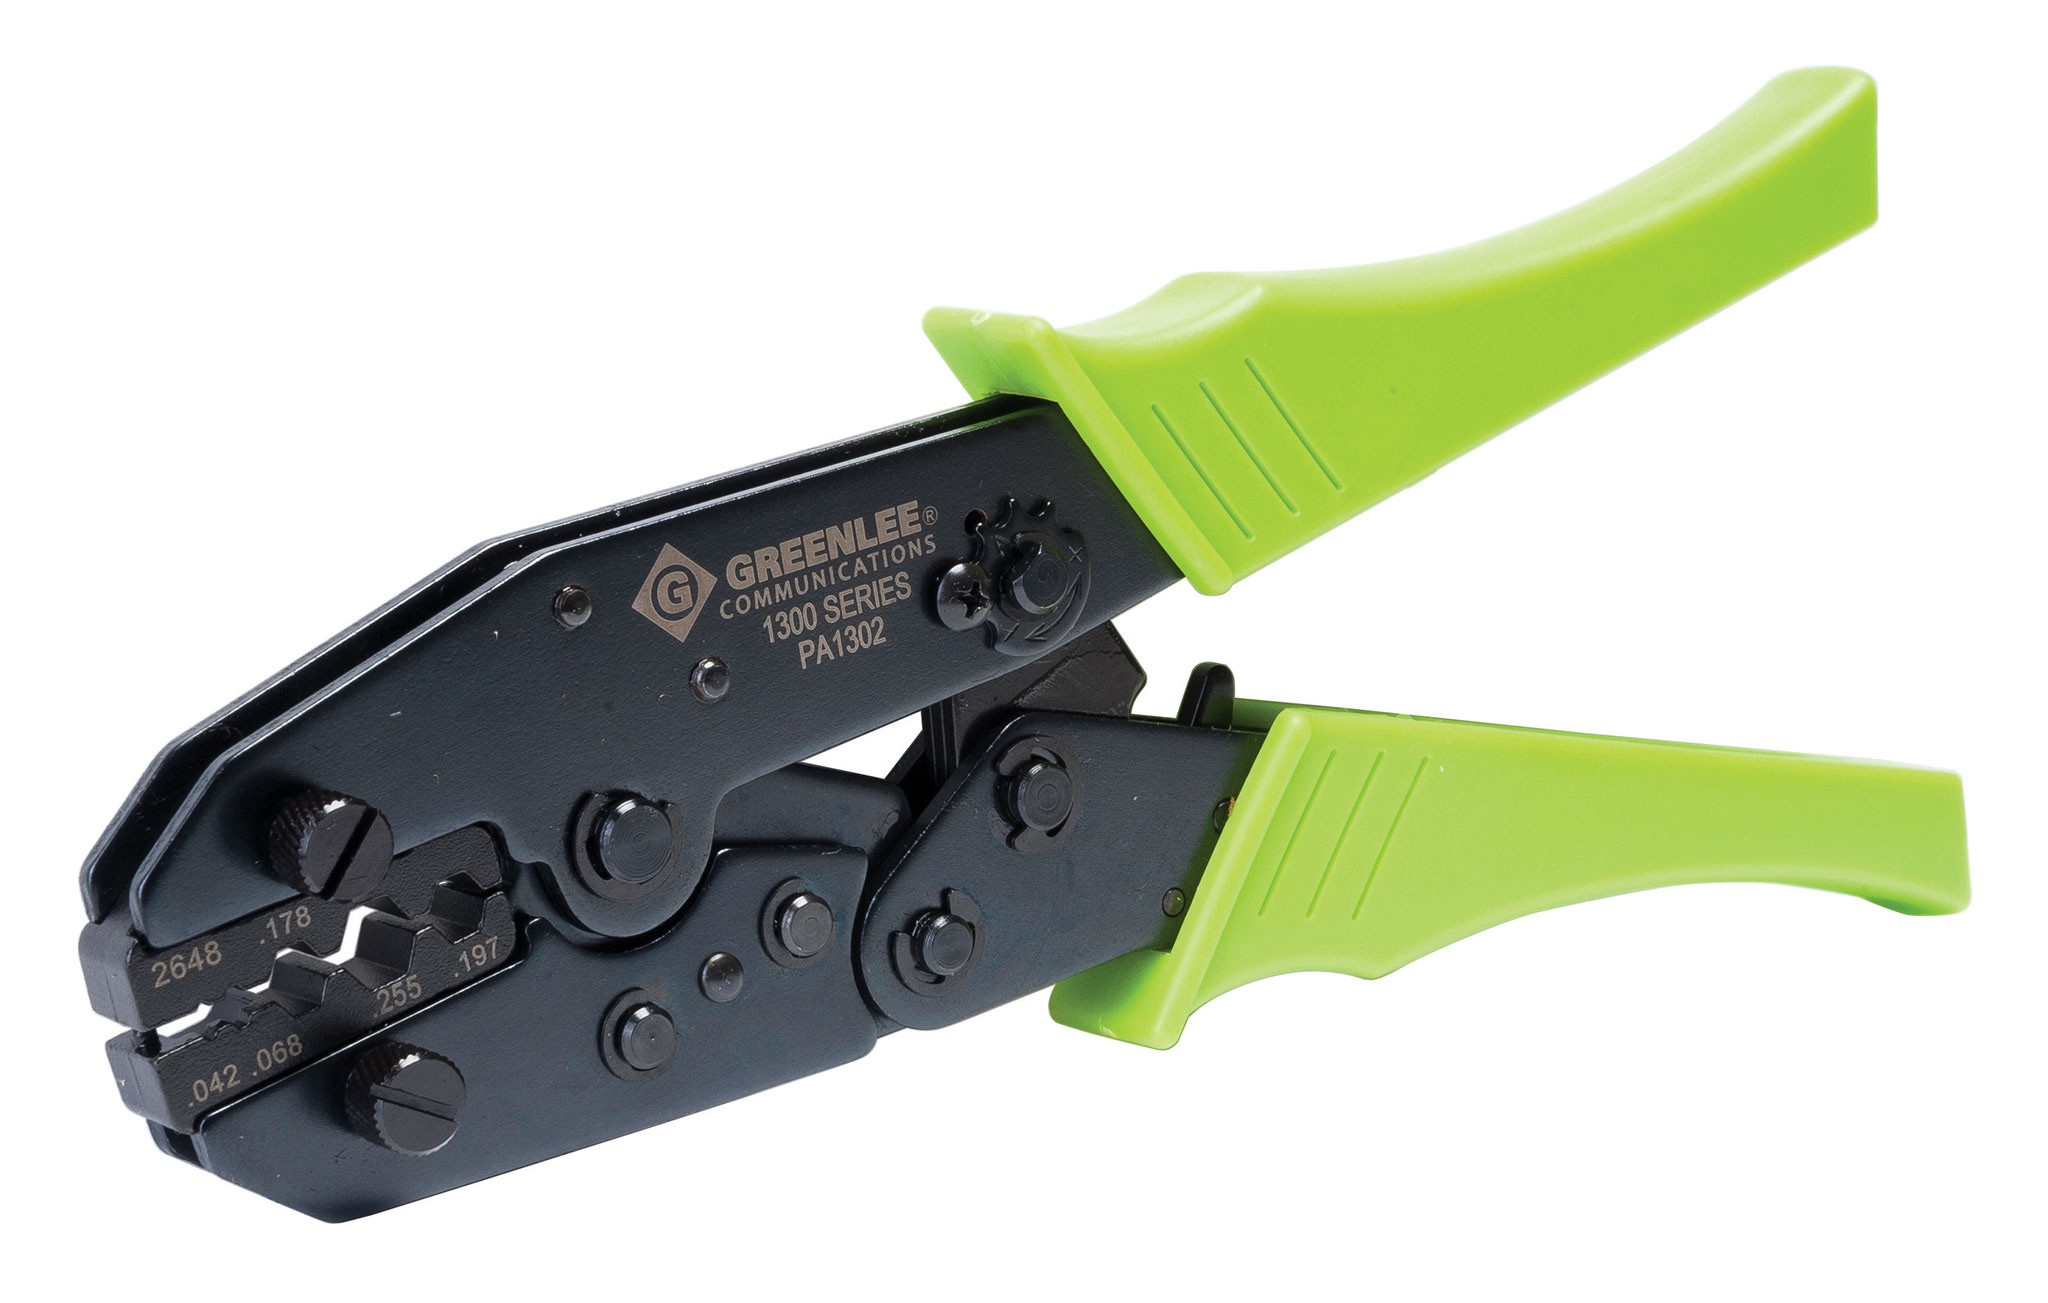 Crimping tool Diagram Greenlee Pa1366 Crimp tool for Rg174 and Belden 1855a Mini Coax Cable Of Crimping tool Diagram